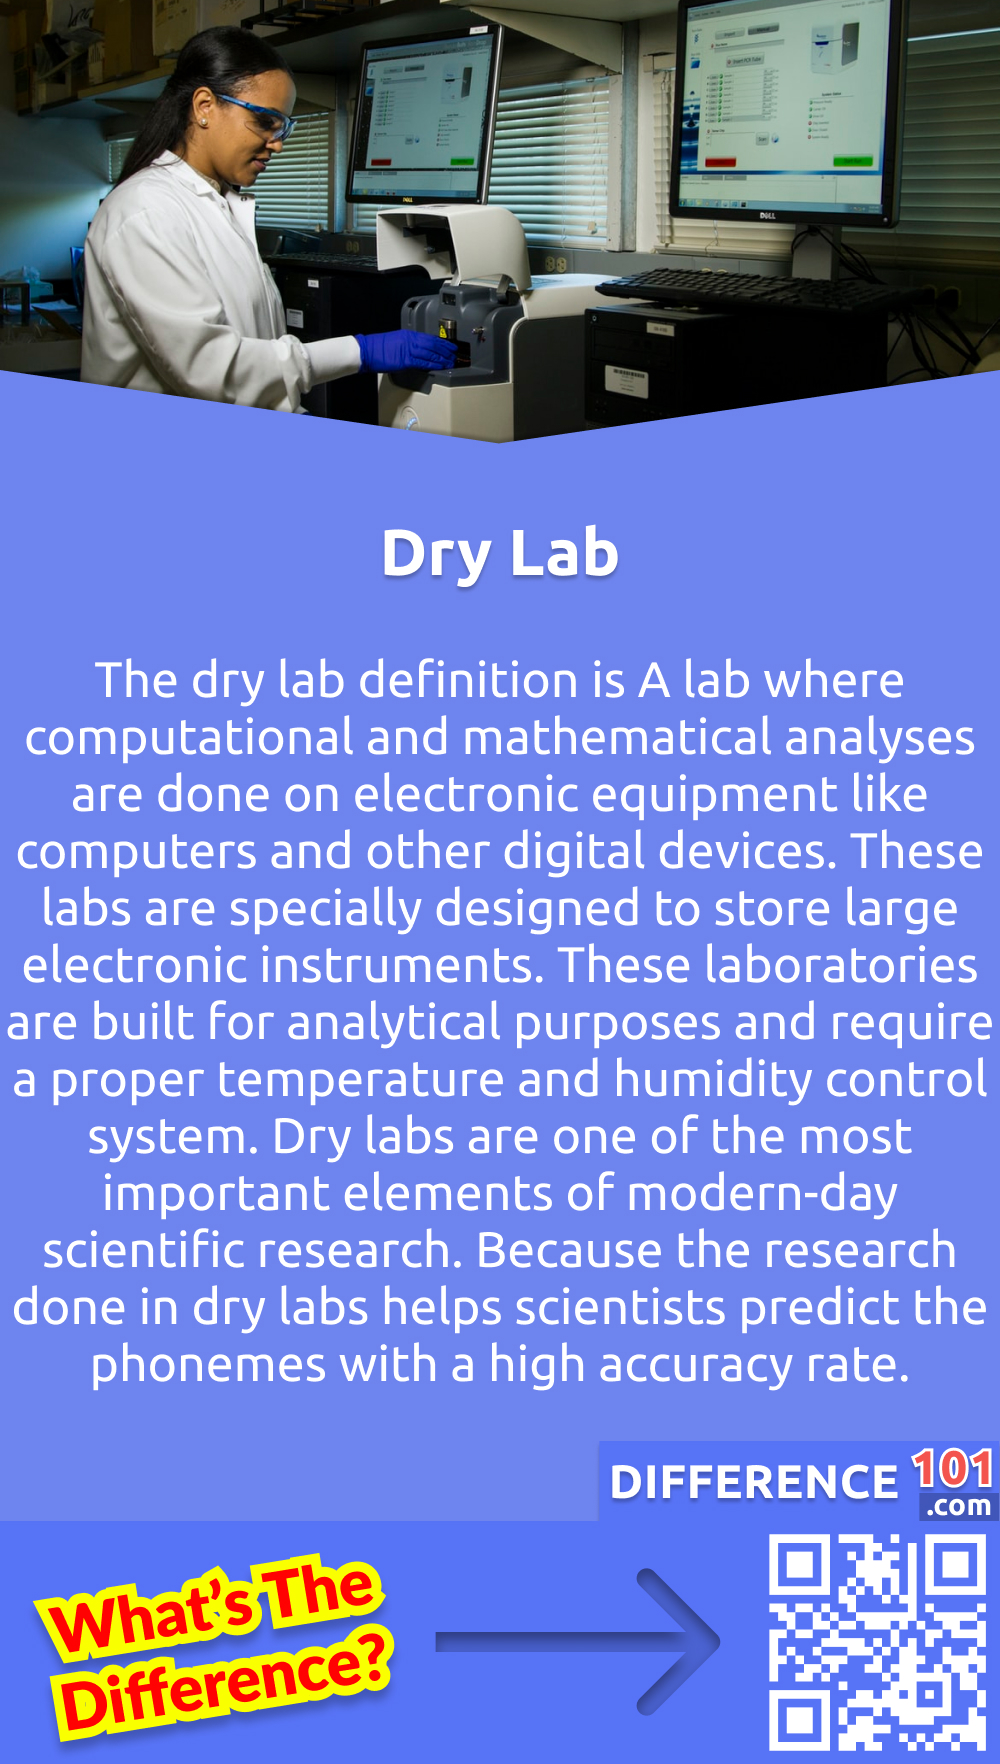 What is a Dry Lab? The dry lab definition is A lab where computational and mathematical analyses are done on electronic equipment like computers and other digital devices. These labs are specially designed to store large electronic instruments. These laboratories are built for analytical purposes and require a proper temperature and humidity control system. Dry labs are one of the most important elements of modern-day scientific research. Because the research done in dry labs helps scientists predict the phonemes with a high accuracy rate.